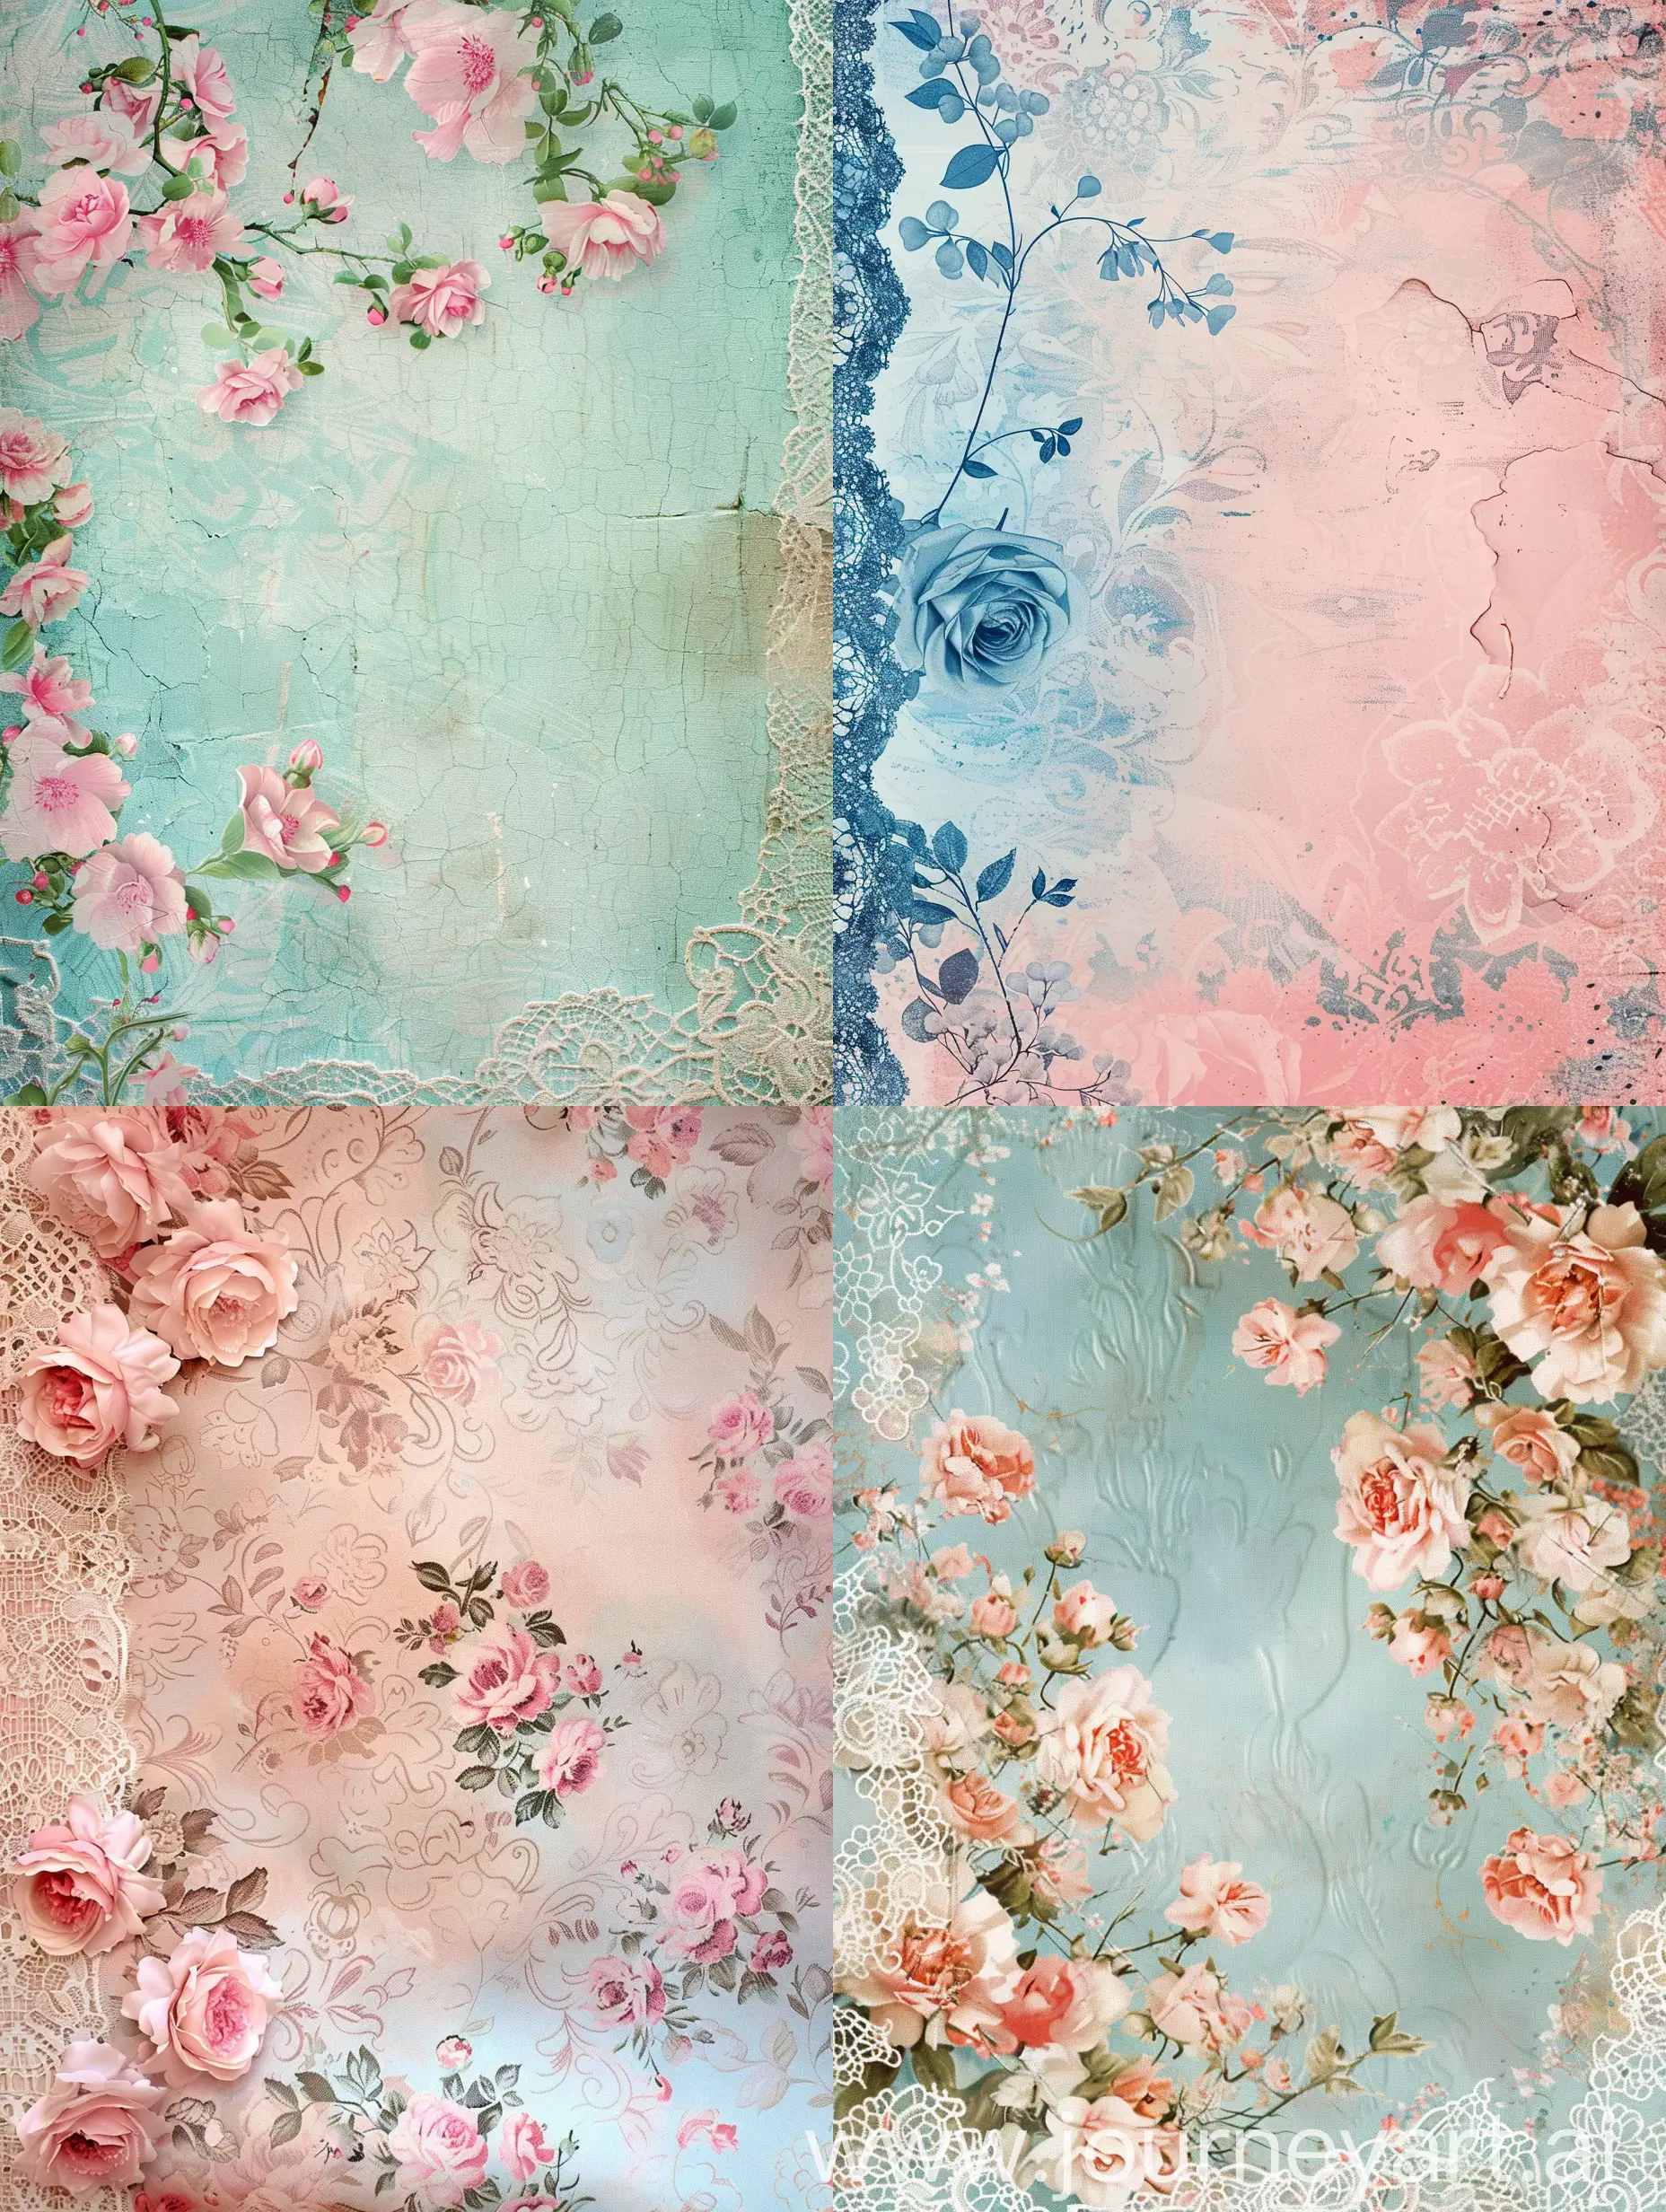 Vintage-Pastel-Floral-Background-with-Lace-Accents